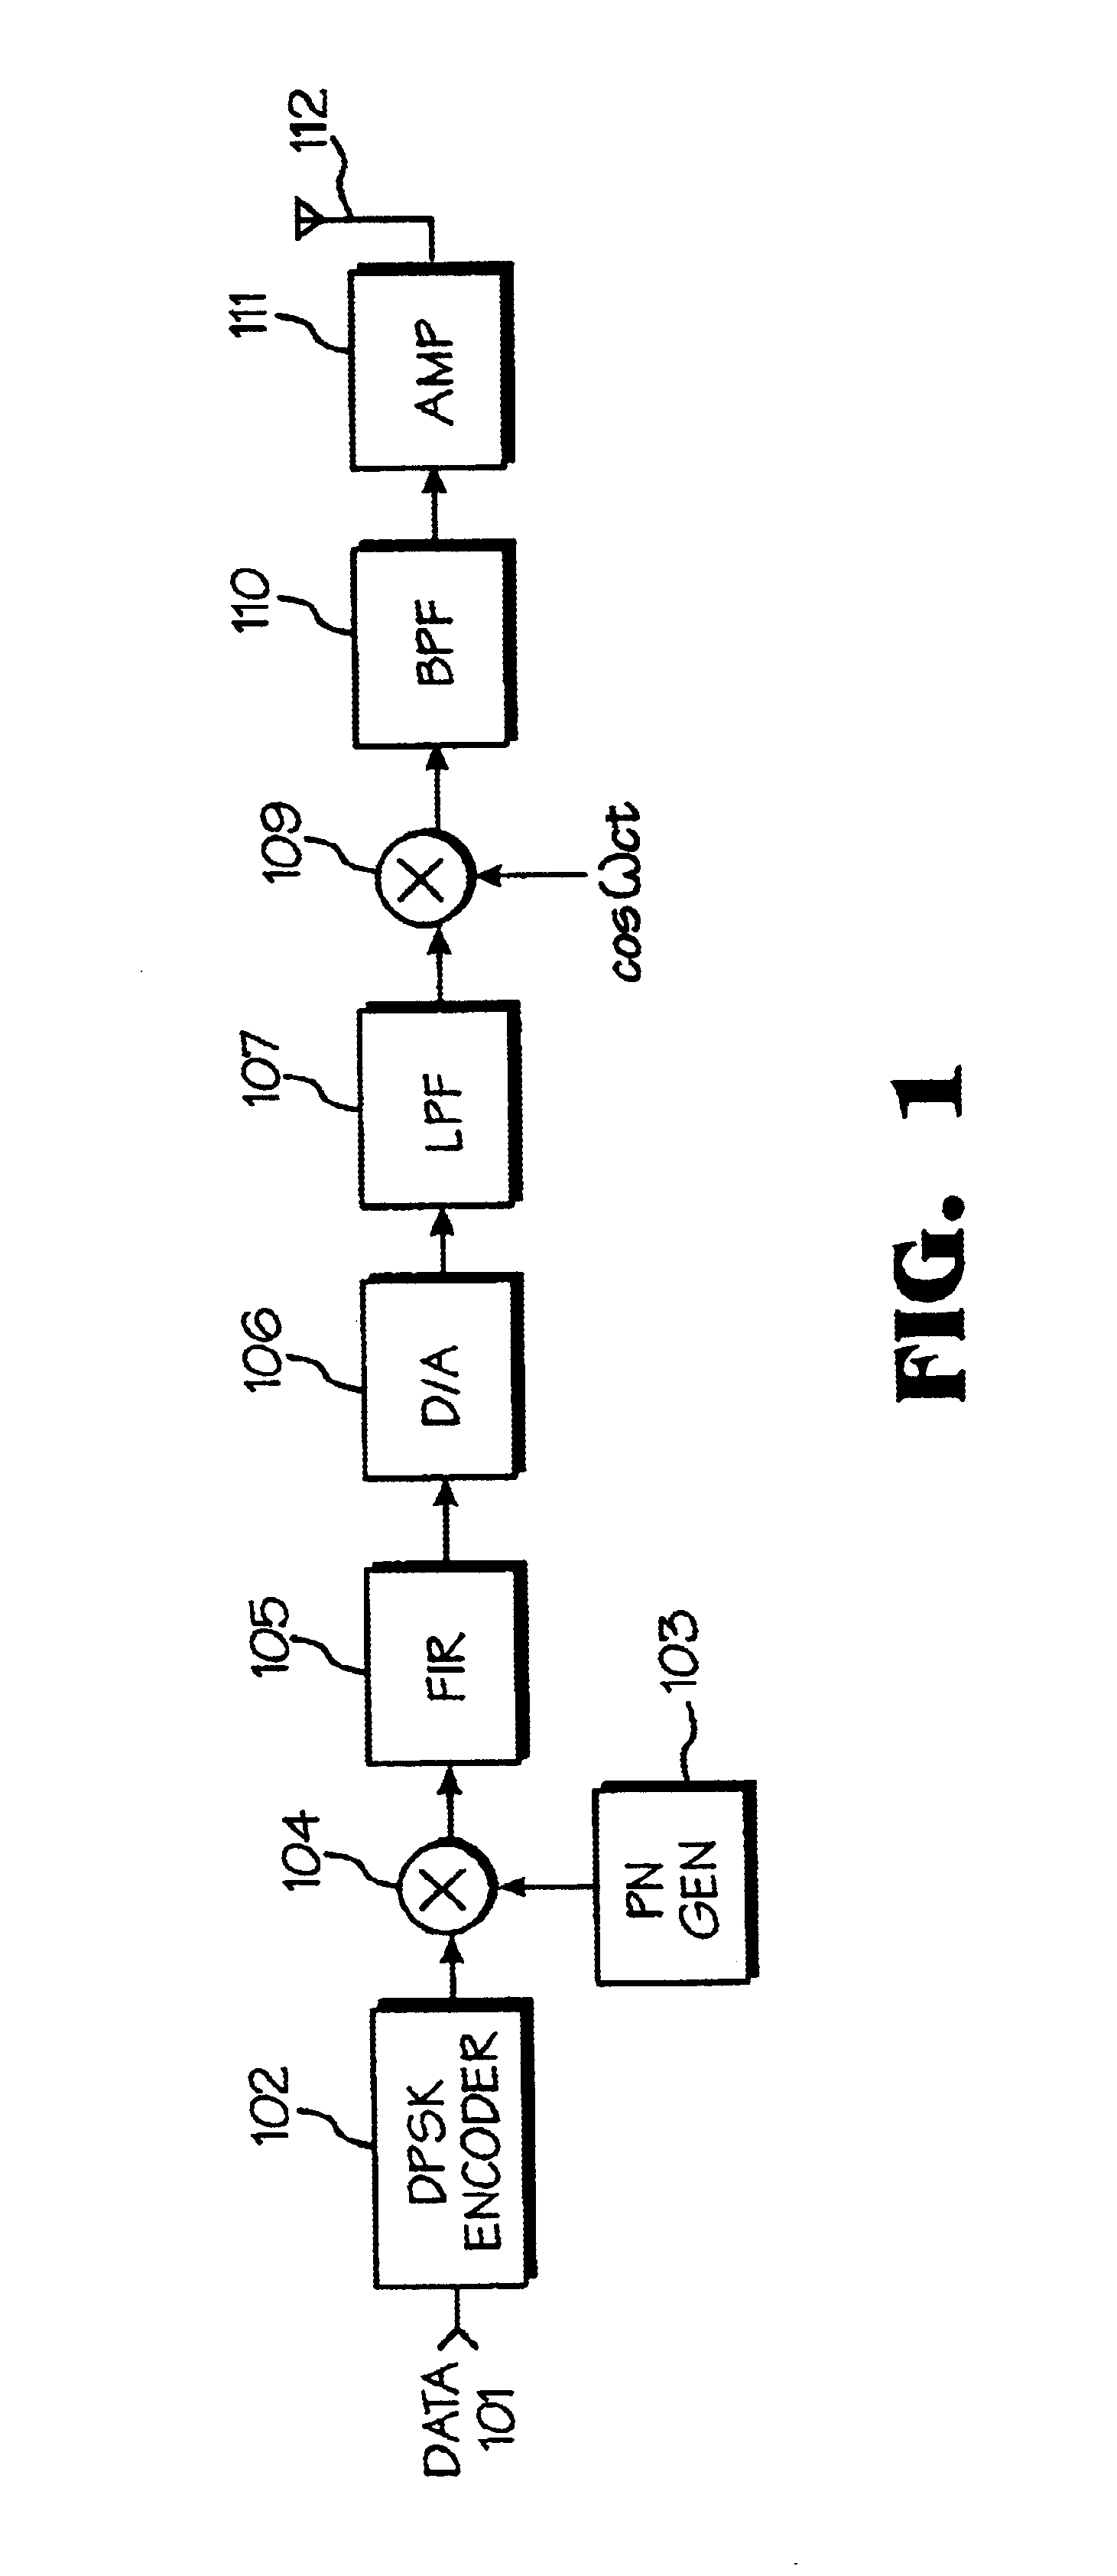 Data transmitter and receiver of a spread spectrum communication system using a pilot channel